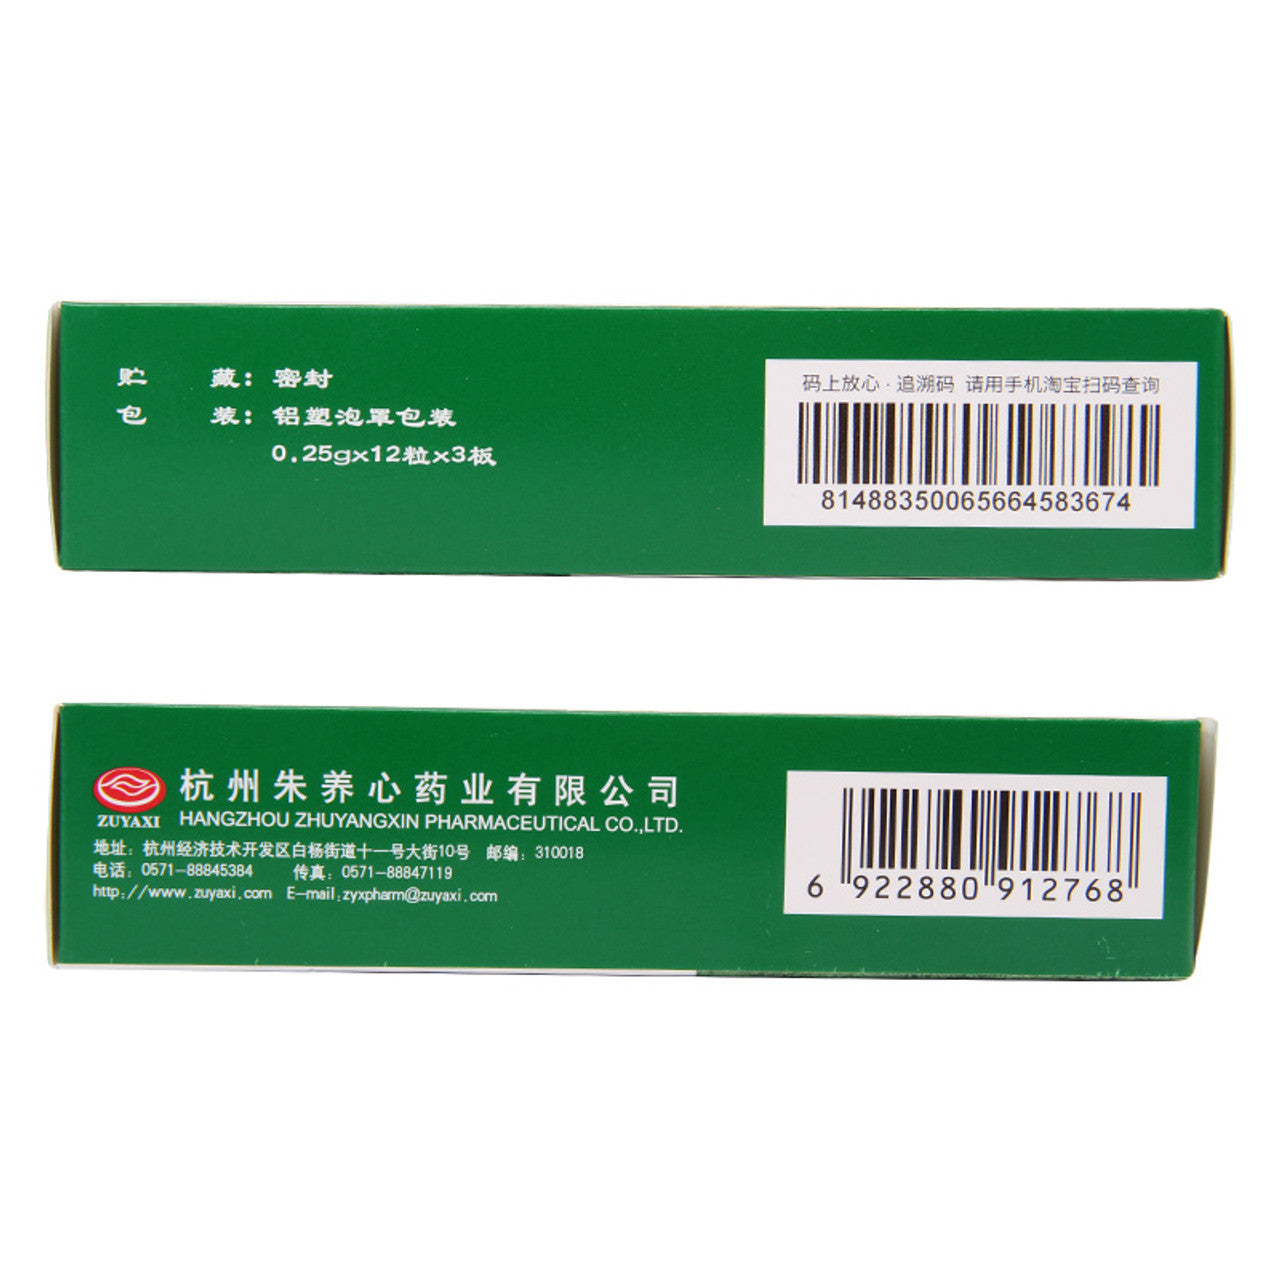 Chinese Herbs. Brand ZHUYANGXIN. Zhishang Jiaonang or ZHISHANGJIAONANG or Zhi Shang Jiao Nang or Zhishang Capsules  For external injury, redness and swelling, internal injury and hypochondriac pain caused by bruises.